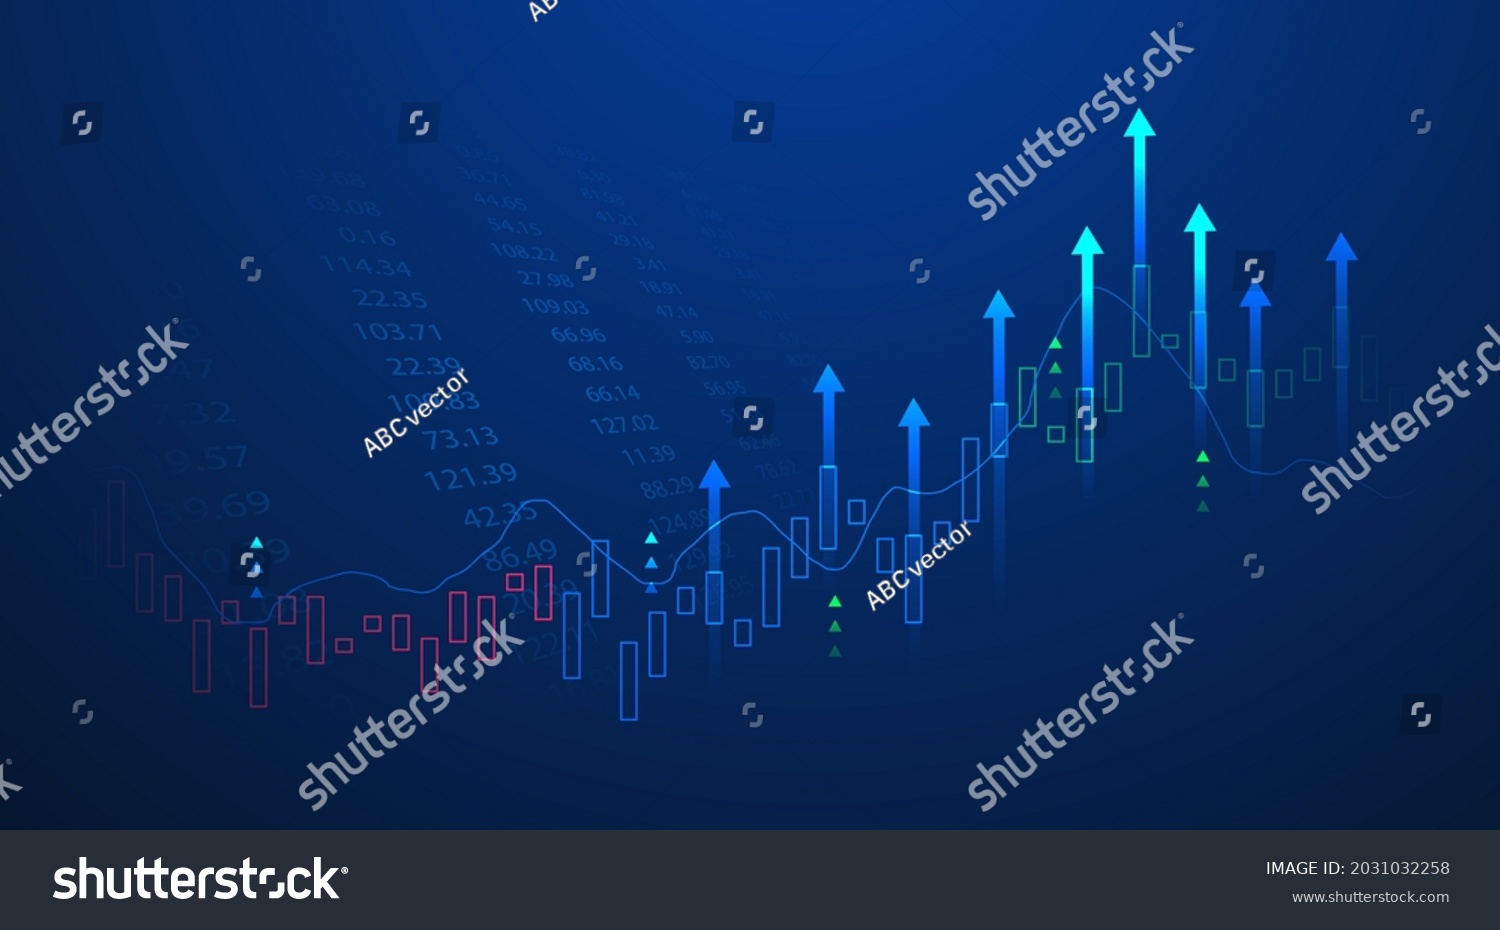 Business candle stick graph chart of stock market investment trading on blue background. Bullish point, up trend of graph. Economy vector design #2031032258